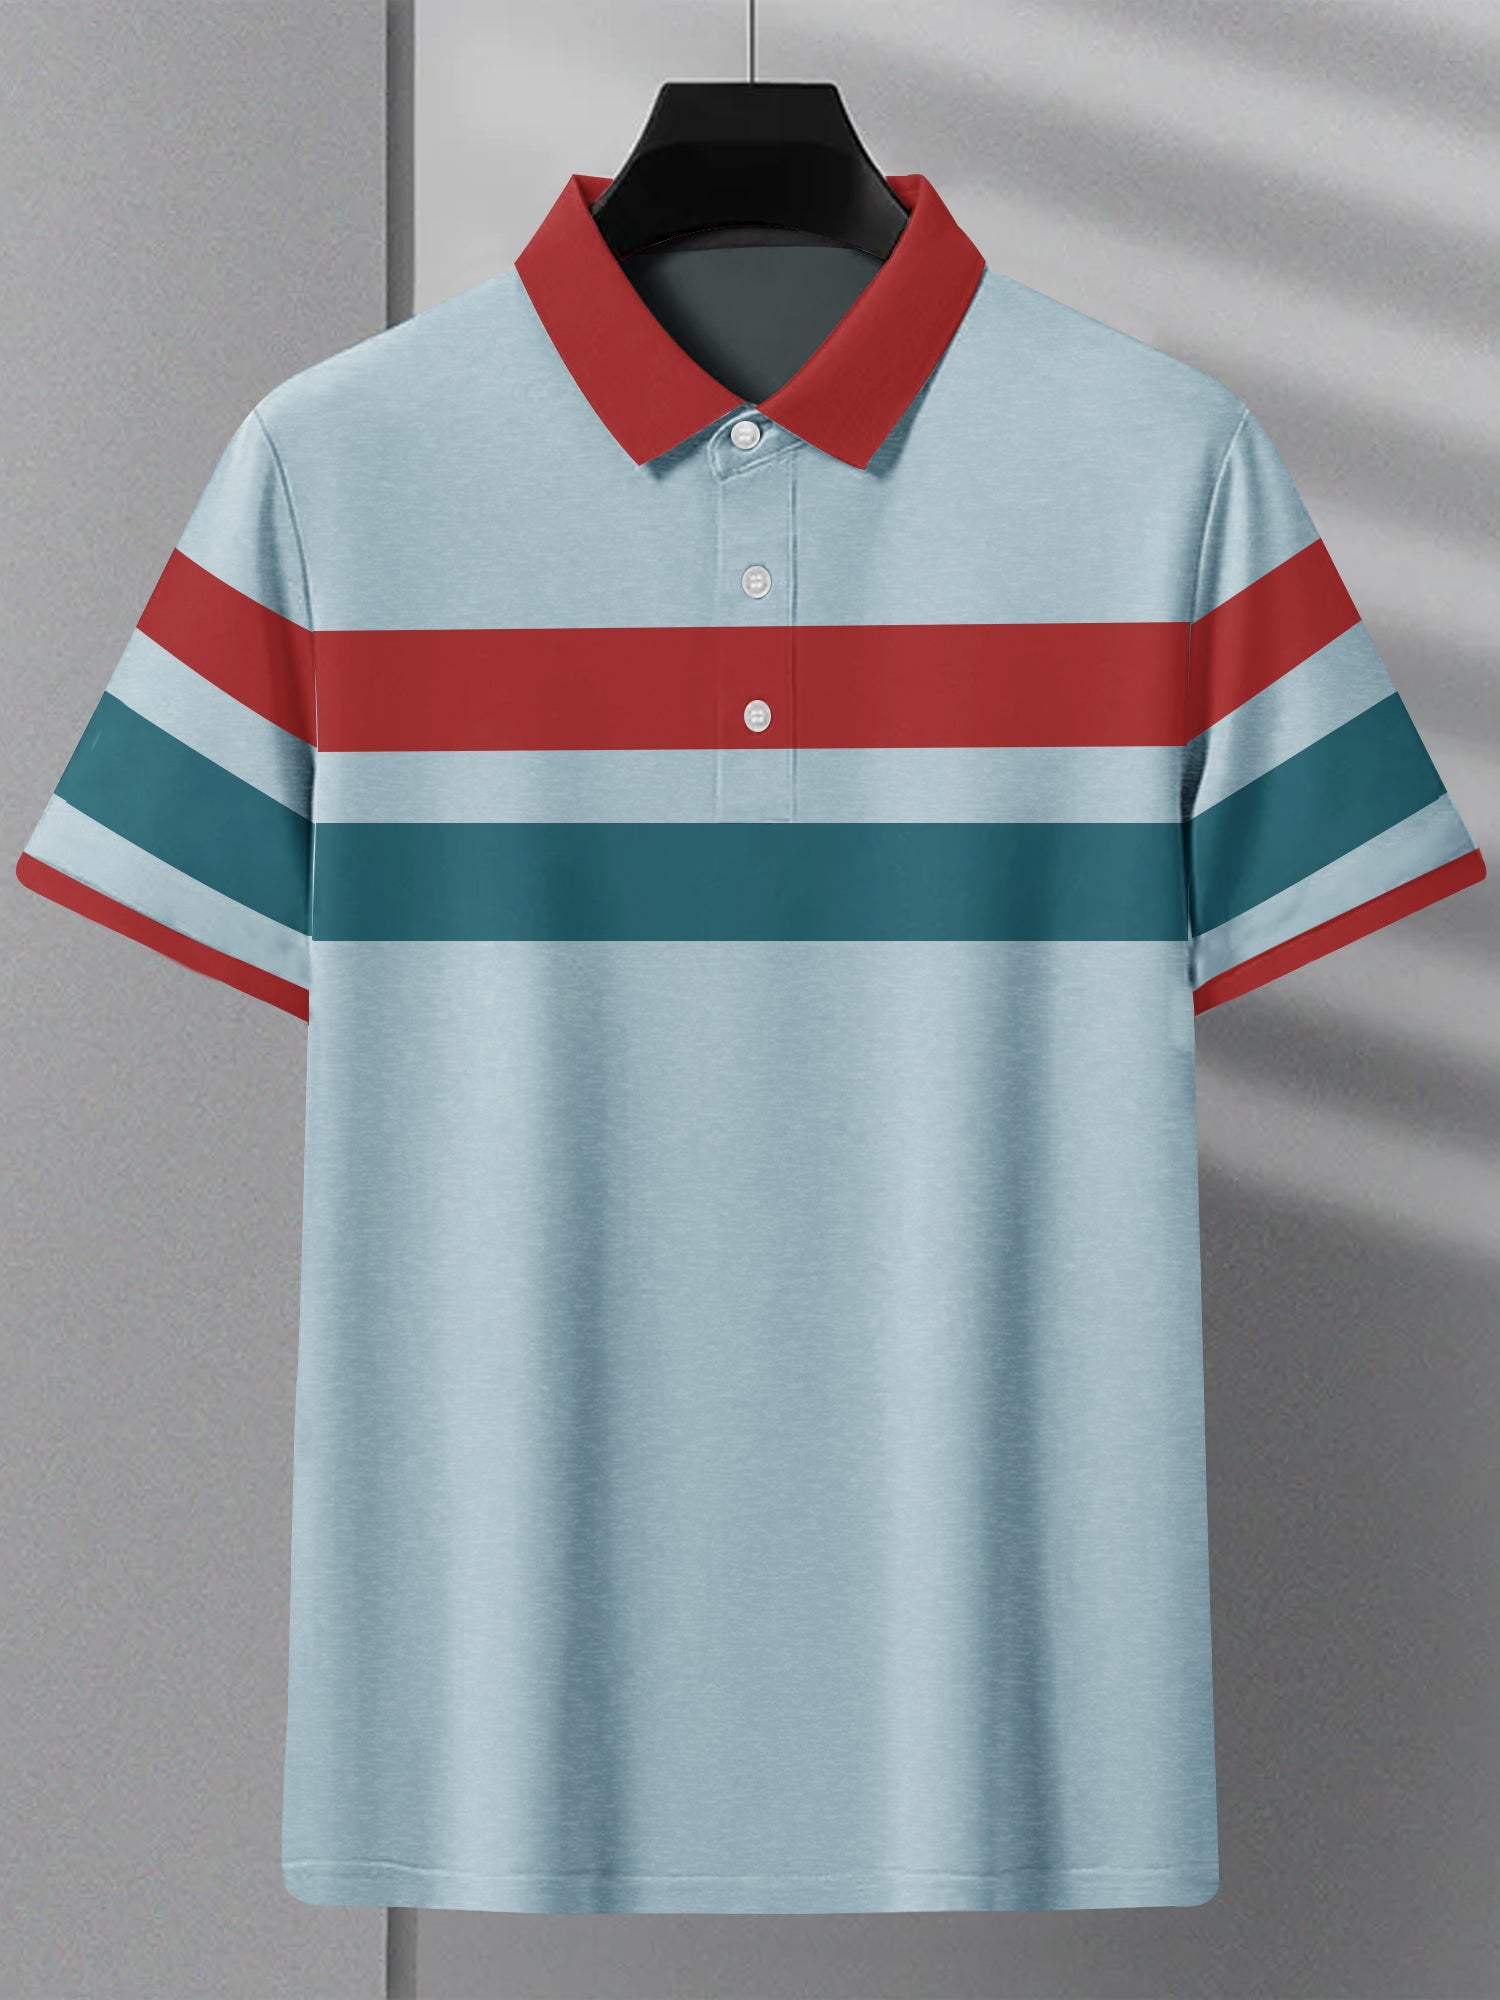 NXT Summer Polo Shirt For Men-Blue Melange with Red & Persian Blue Stripe-SP1451/RT2339